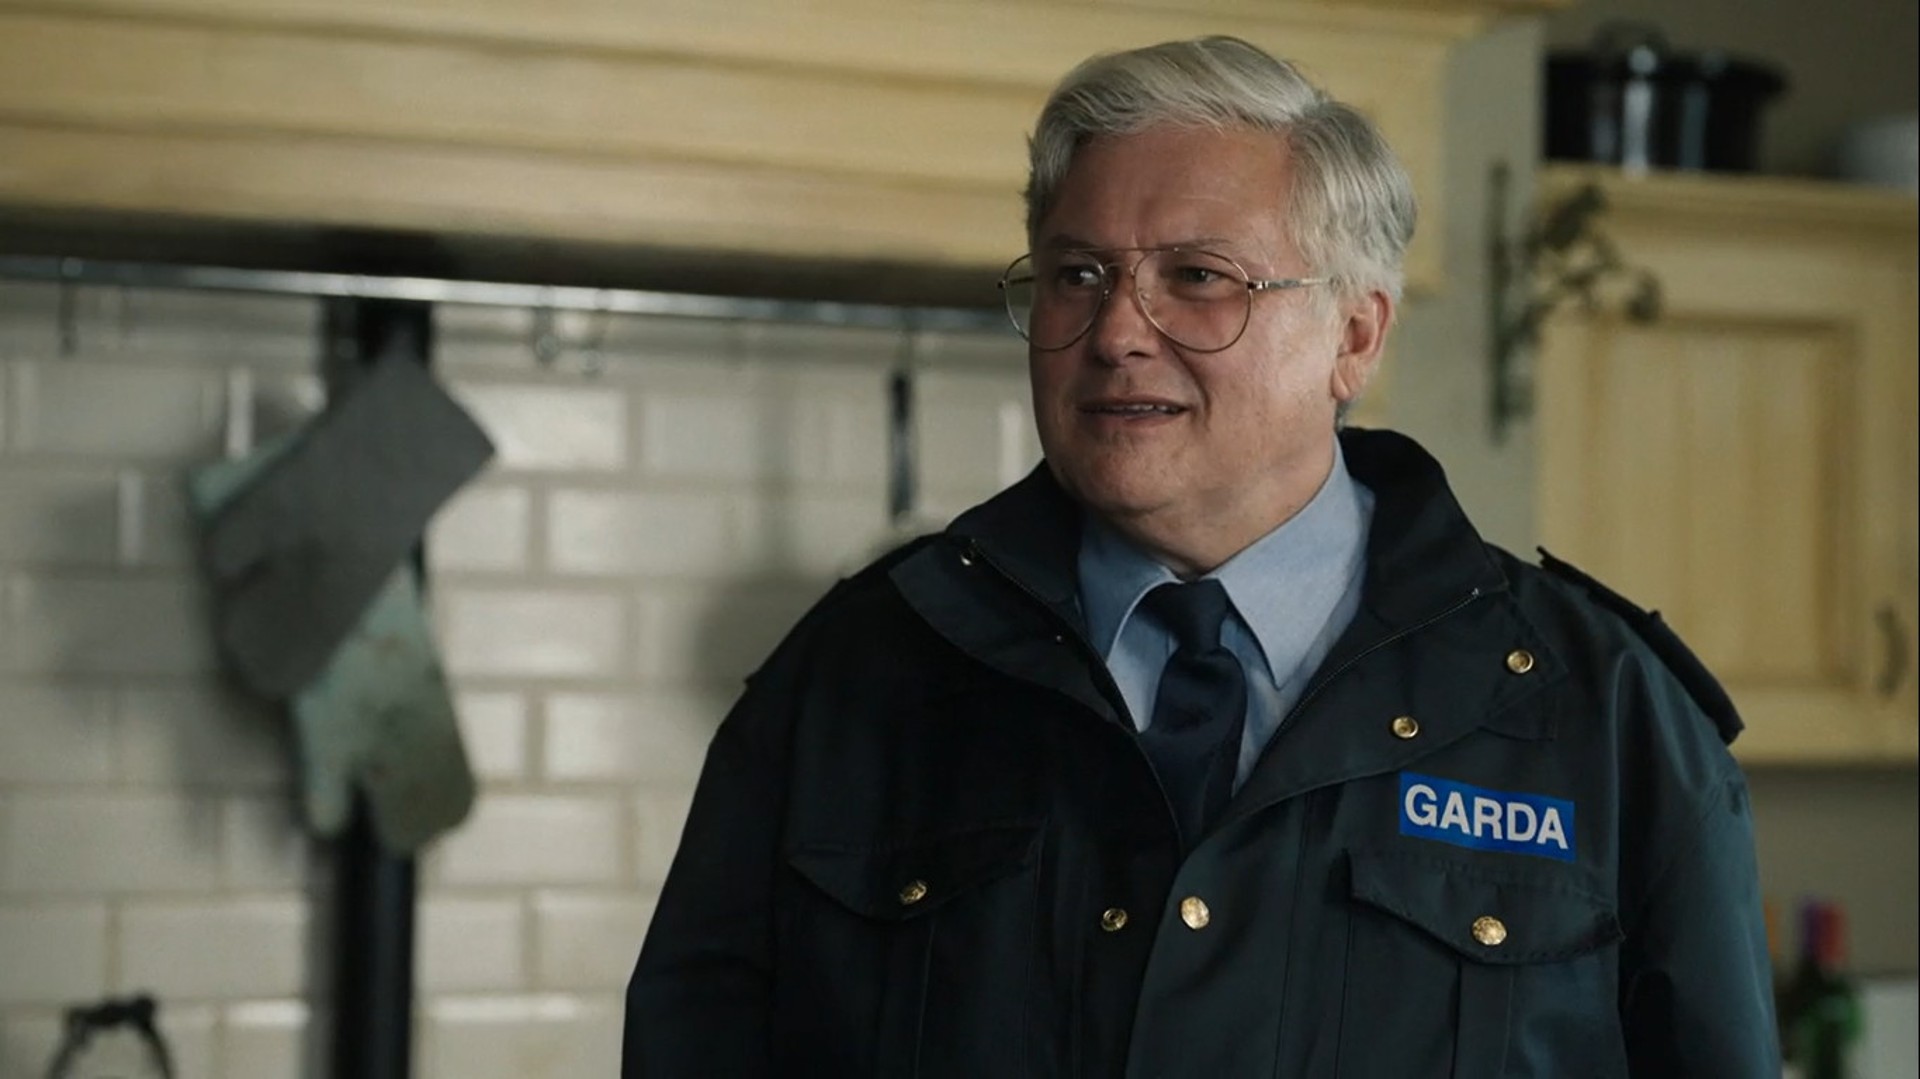 Getting to Know 'Holding' Star Conleth Hill